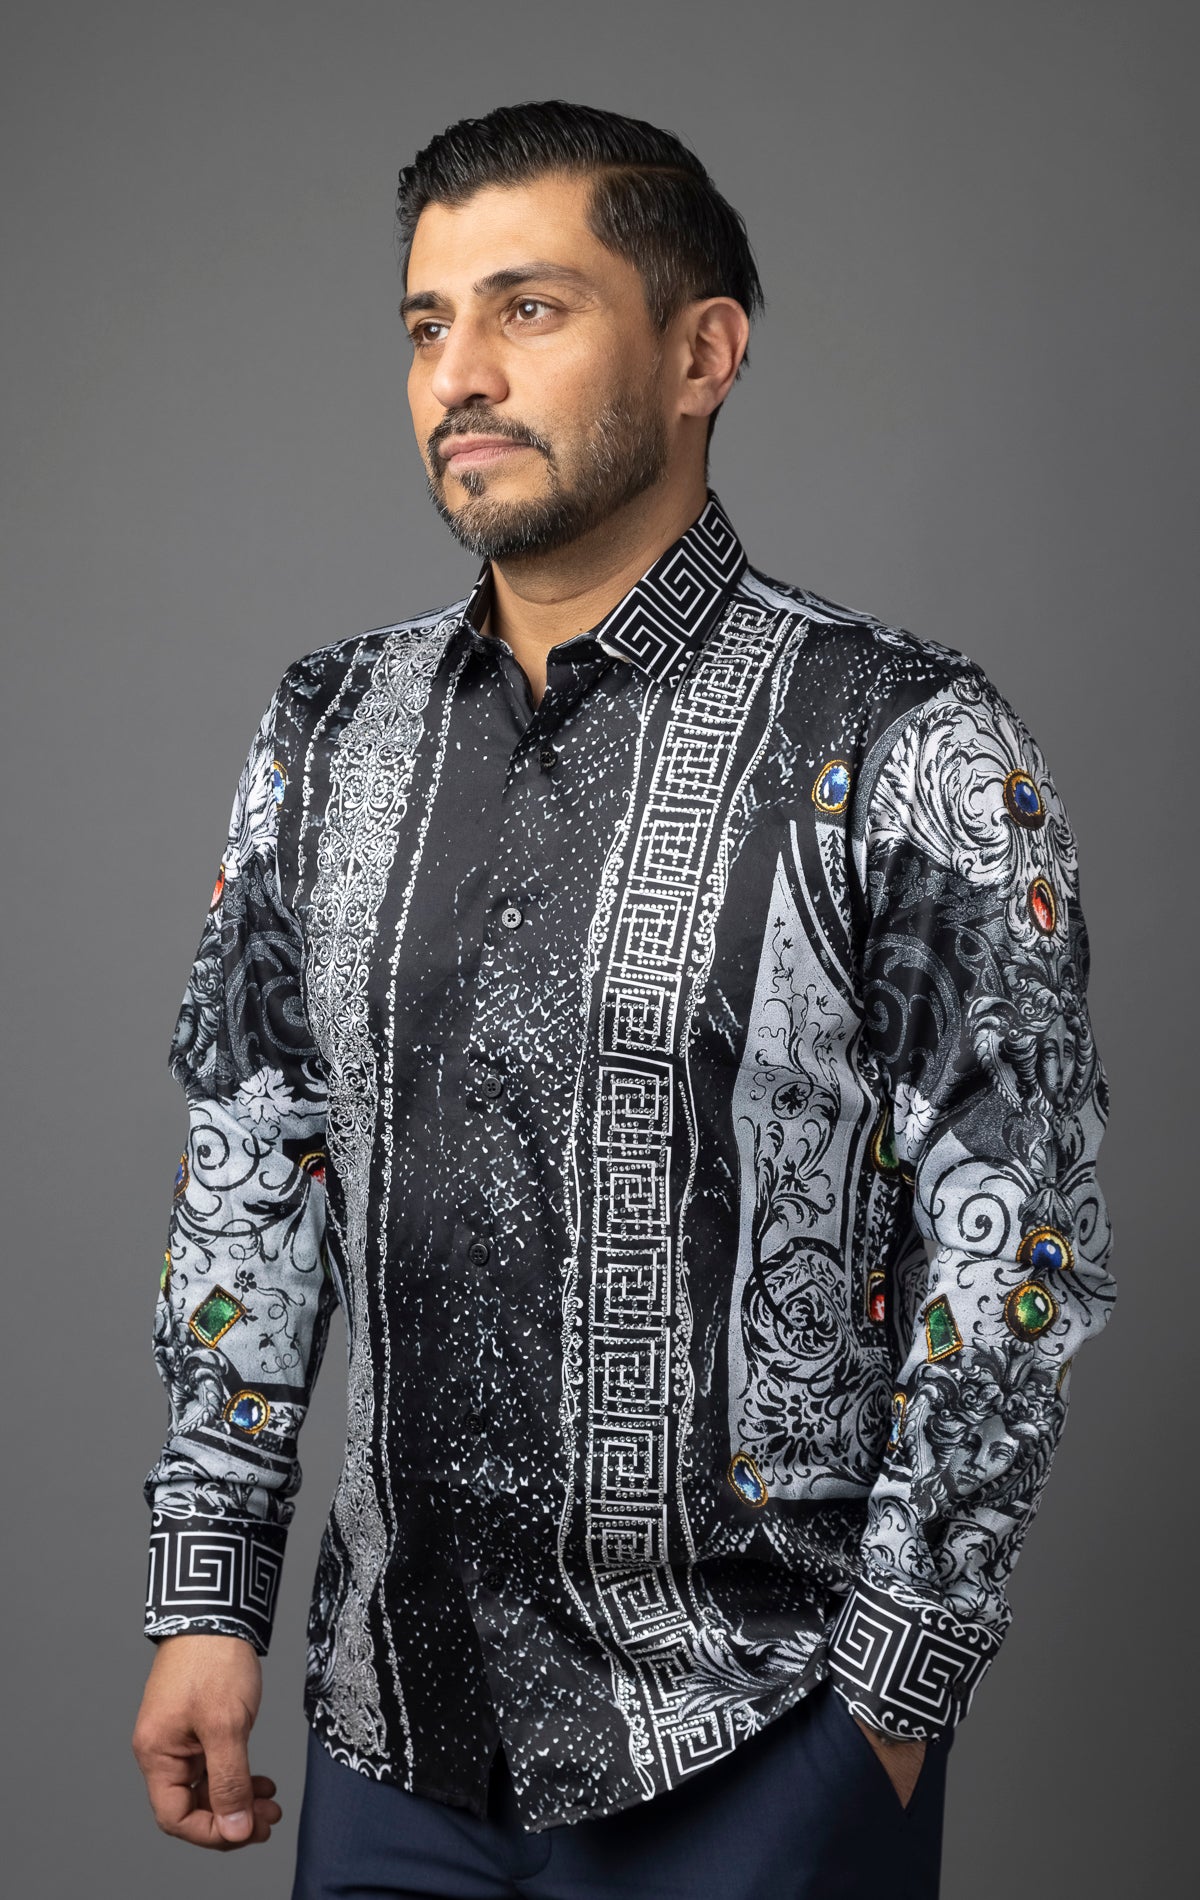 Summer Night Stone button-up shirt from Under the Sun featuring bold floral, Greek key pattern, rhinestone, Medusa, and jewels prints, lightweight, long-sleeve design.